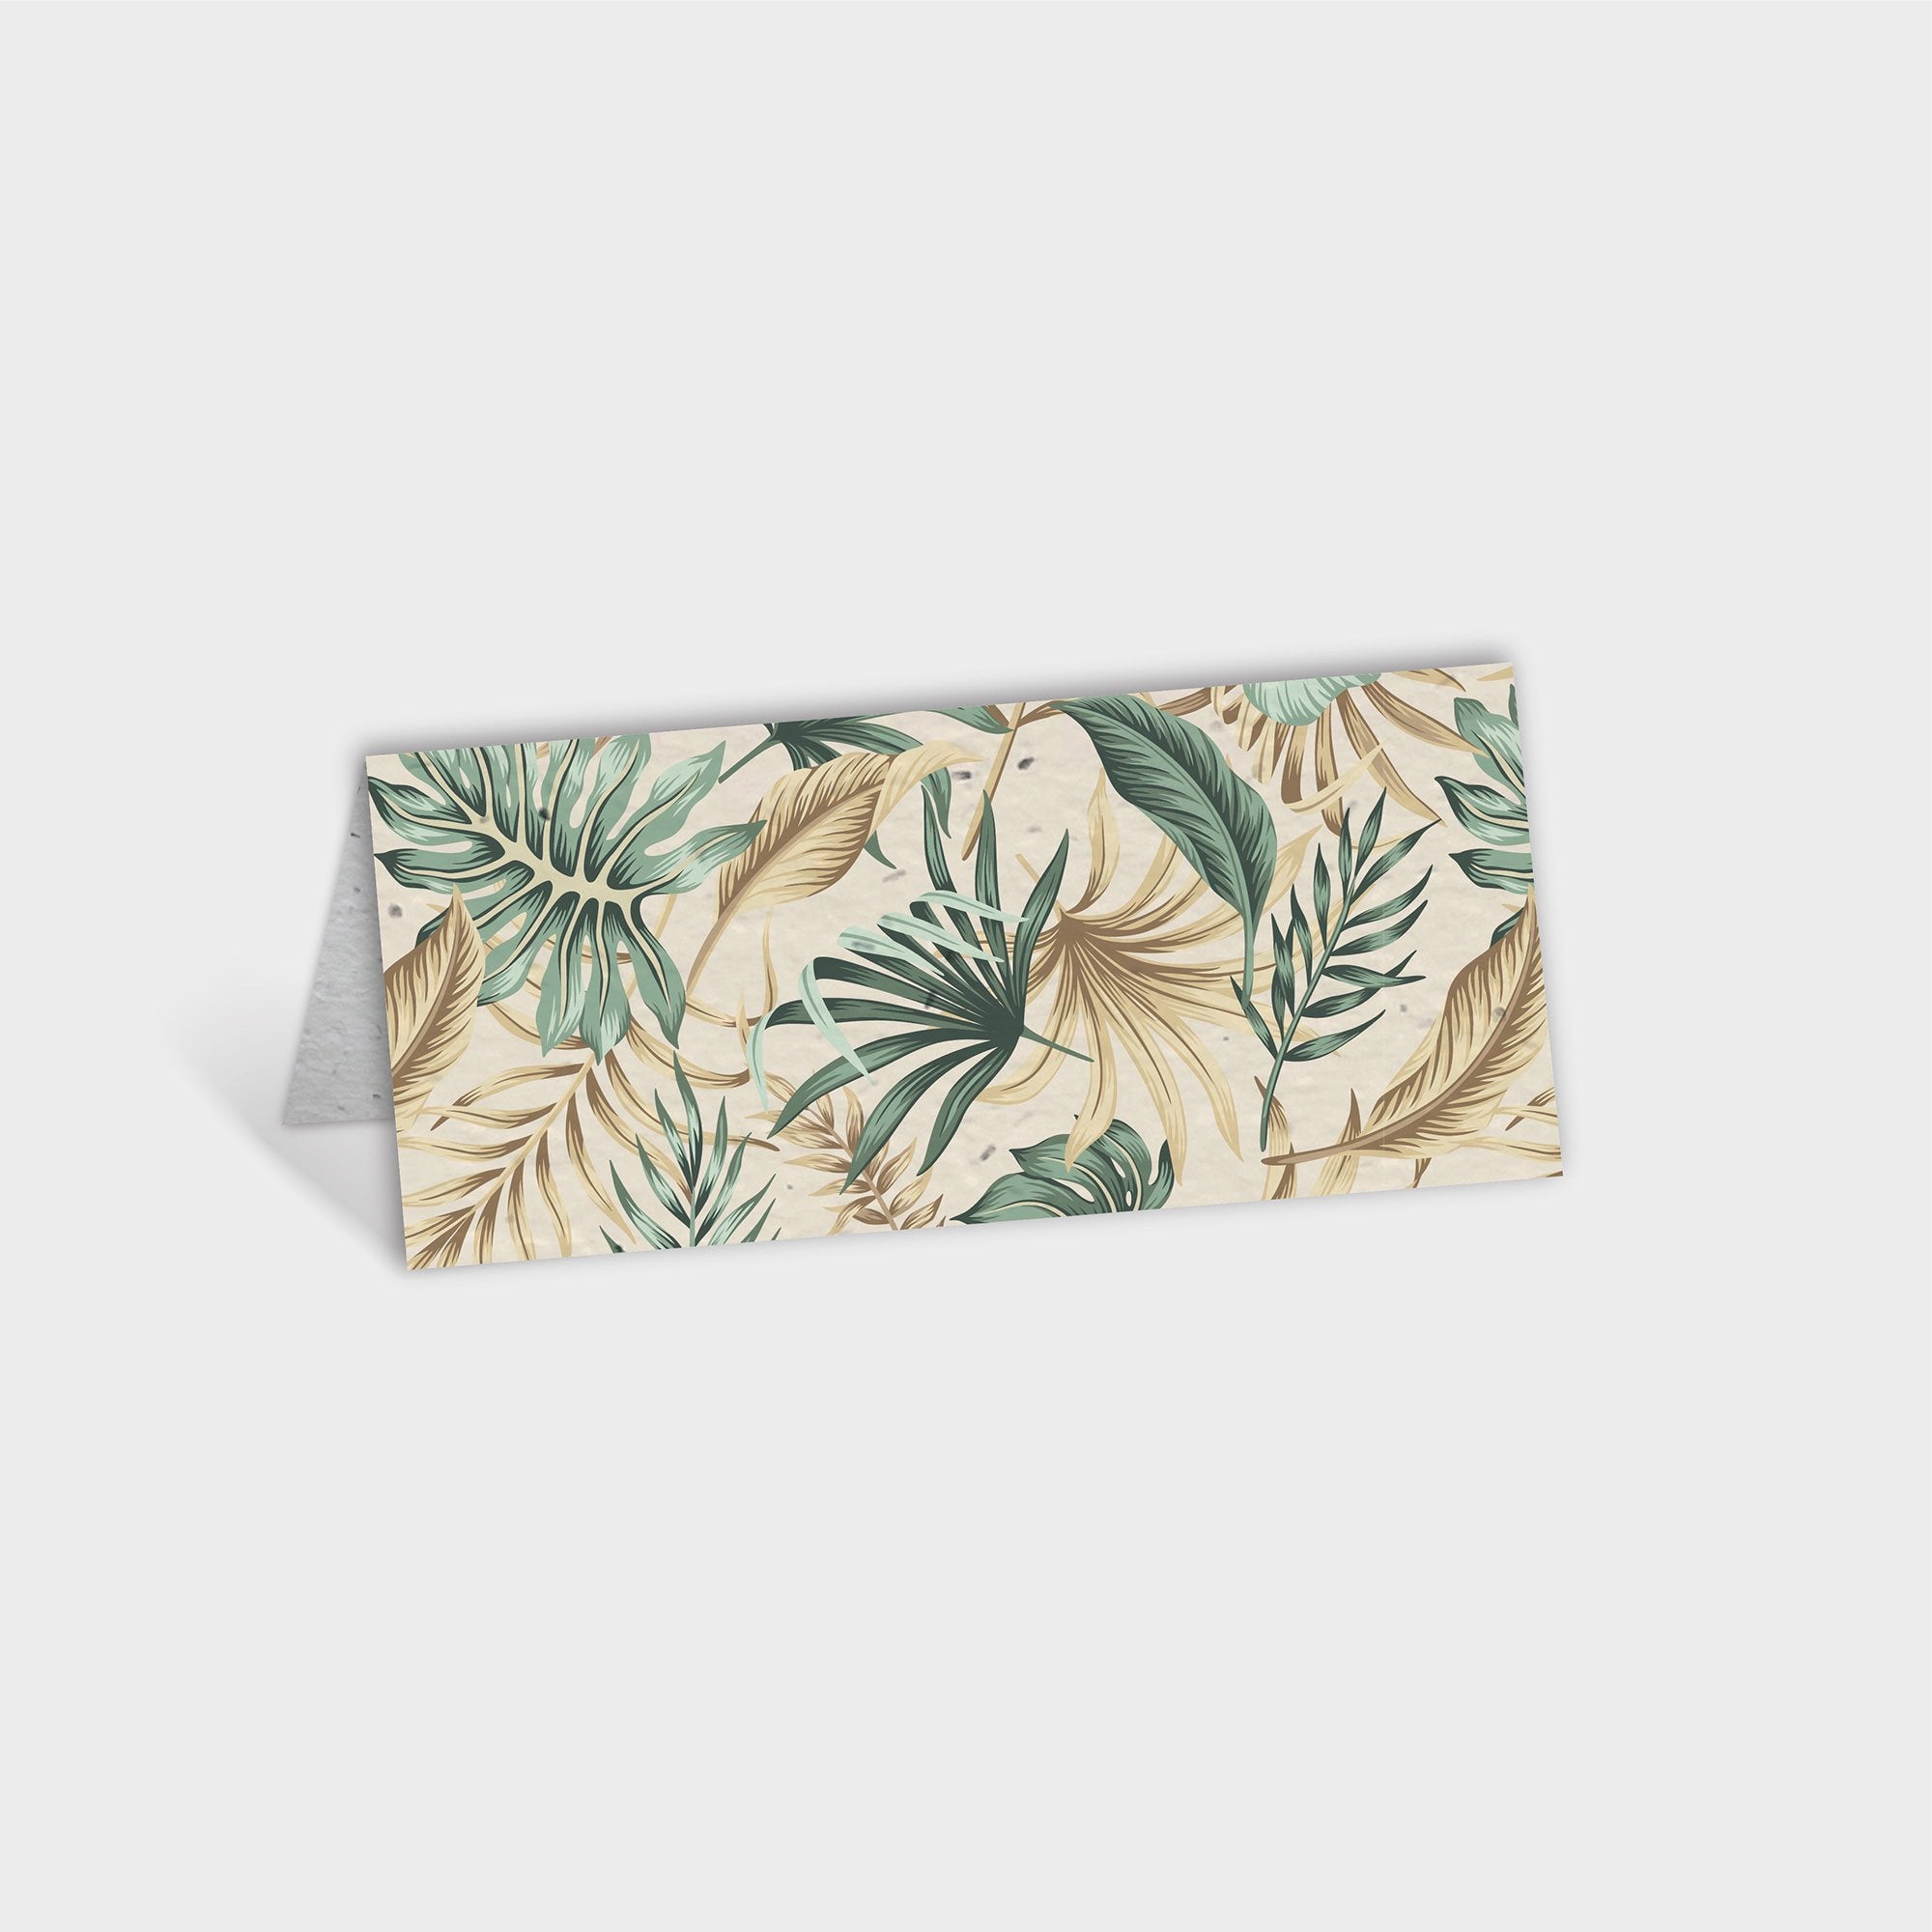 Shop online Sahara Palms - 100% biodegradable seed-embedded cards Shop -The Seed Card Company